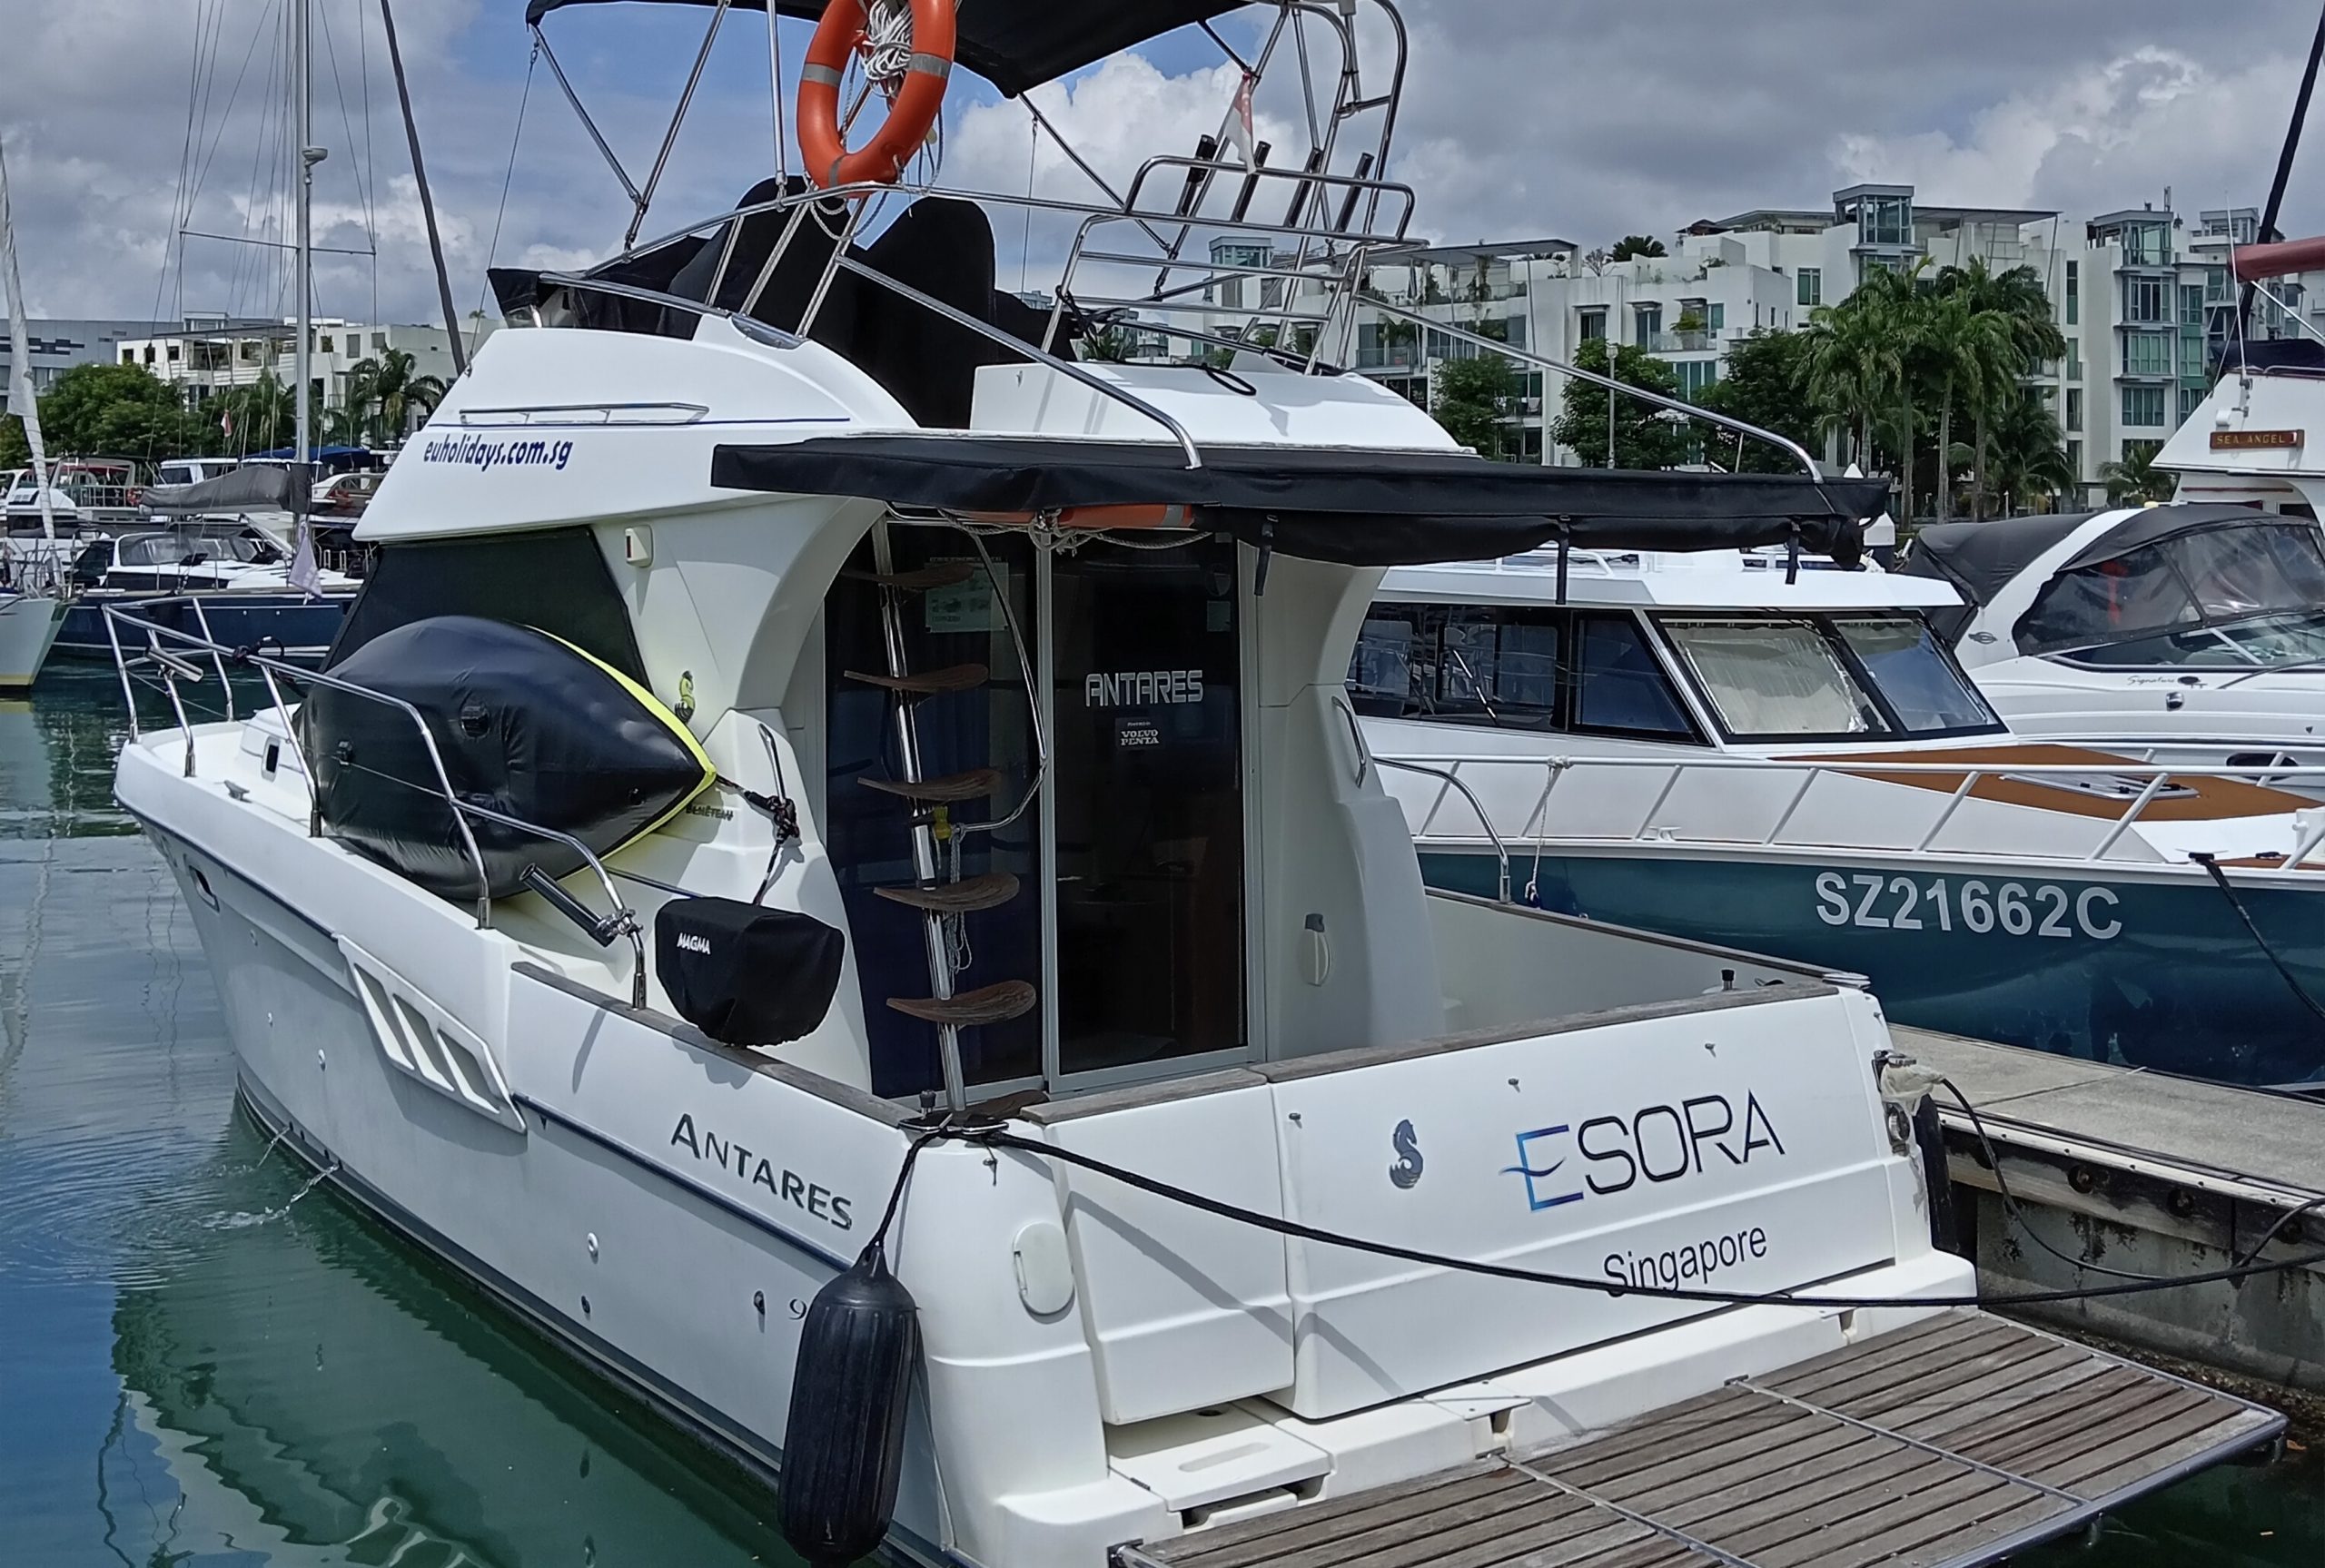 used yacht for sale singapore